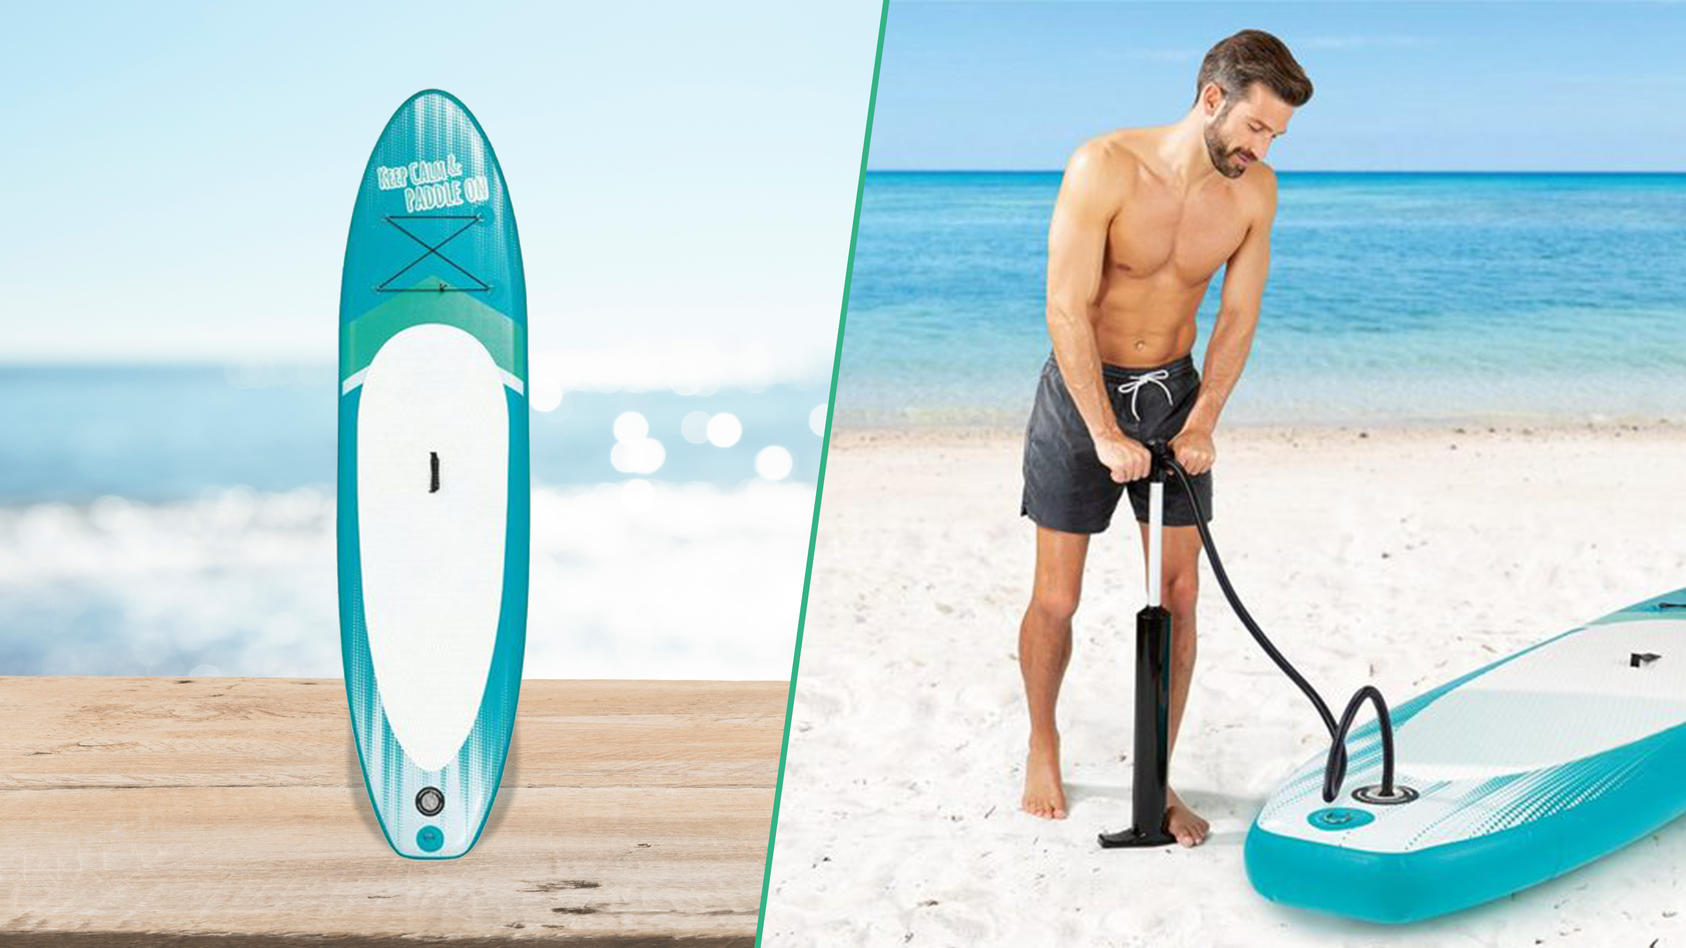 Netto Euro 180 bei für SUP-Board Stand-up-Paddling: